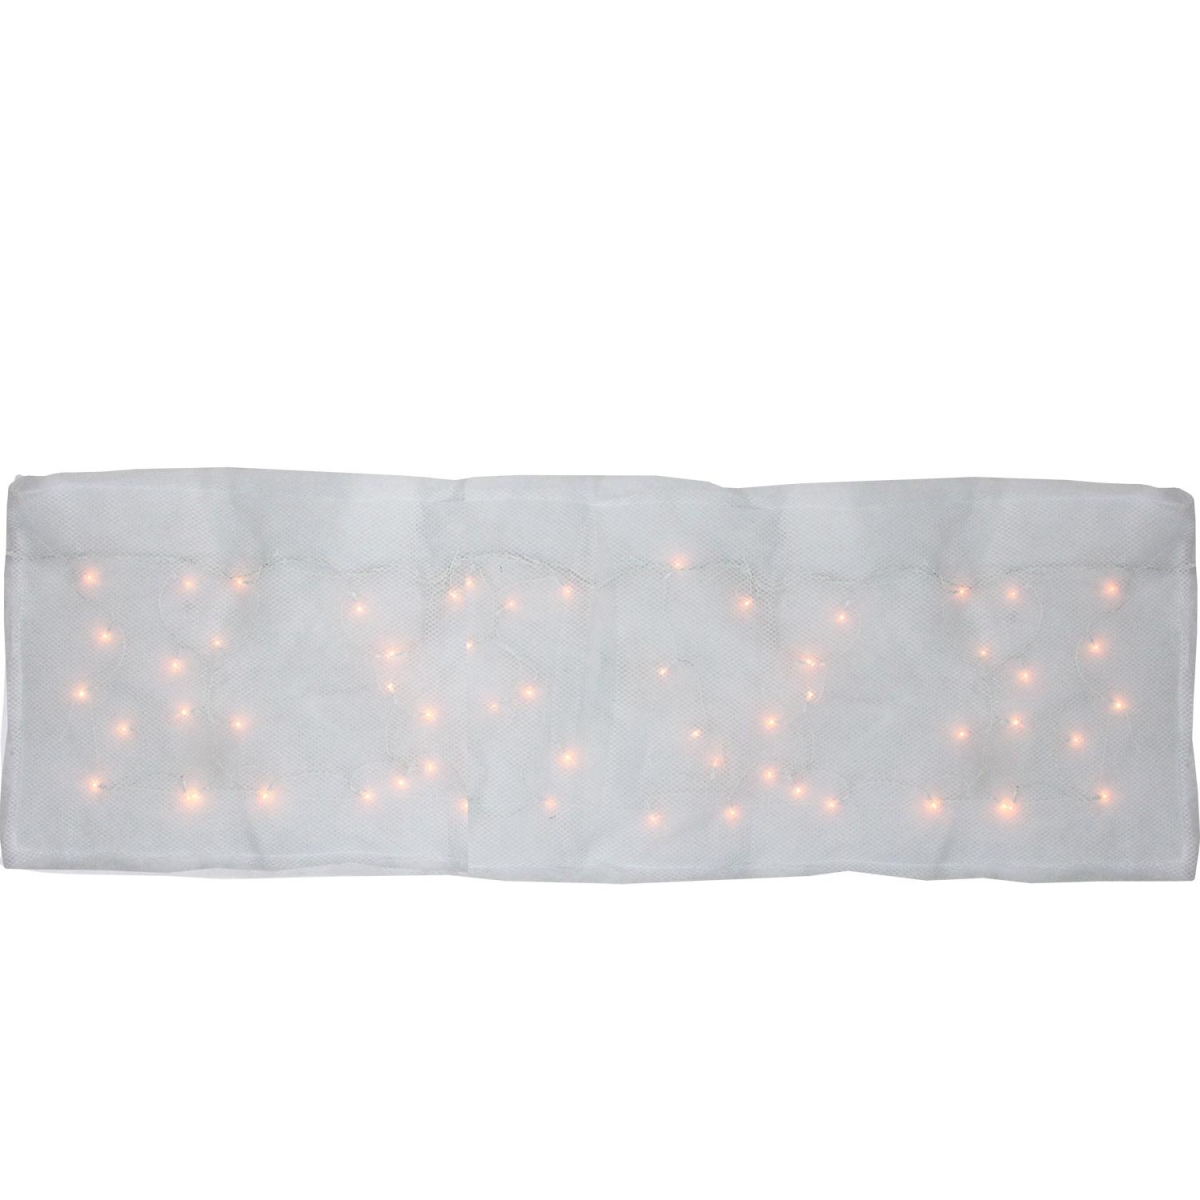 32584715 8 Function Led Illuminated Snow Blanket For Mantle Or Christmas Village Display